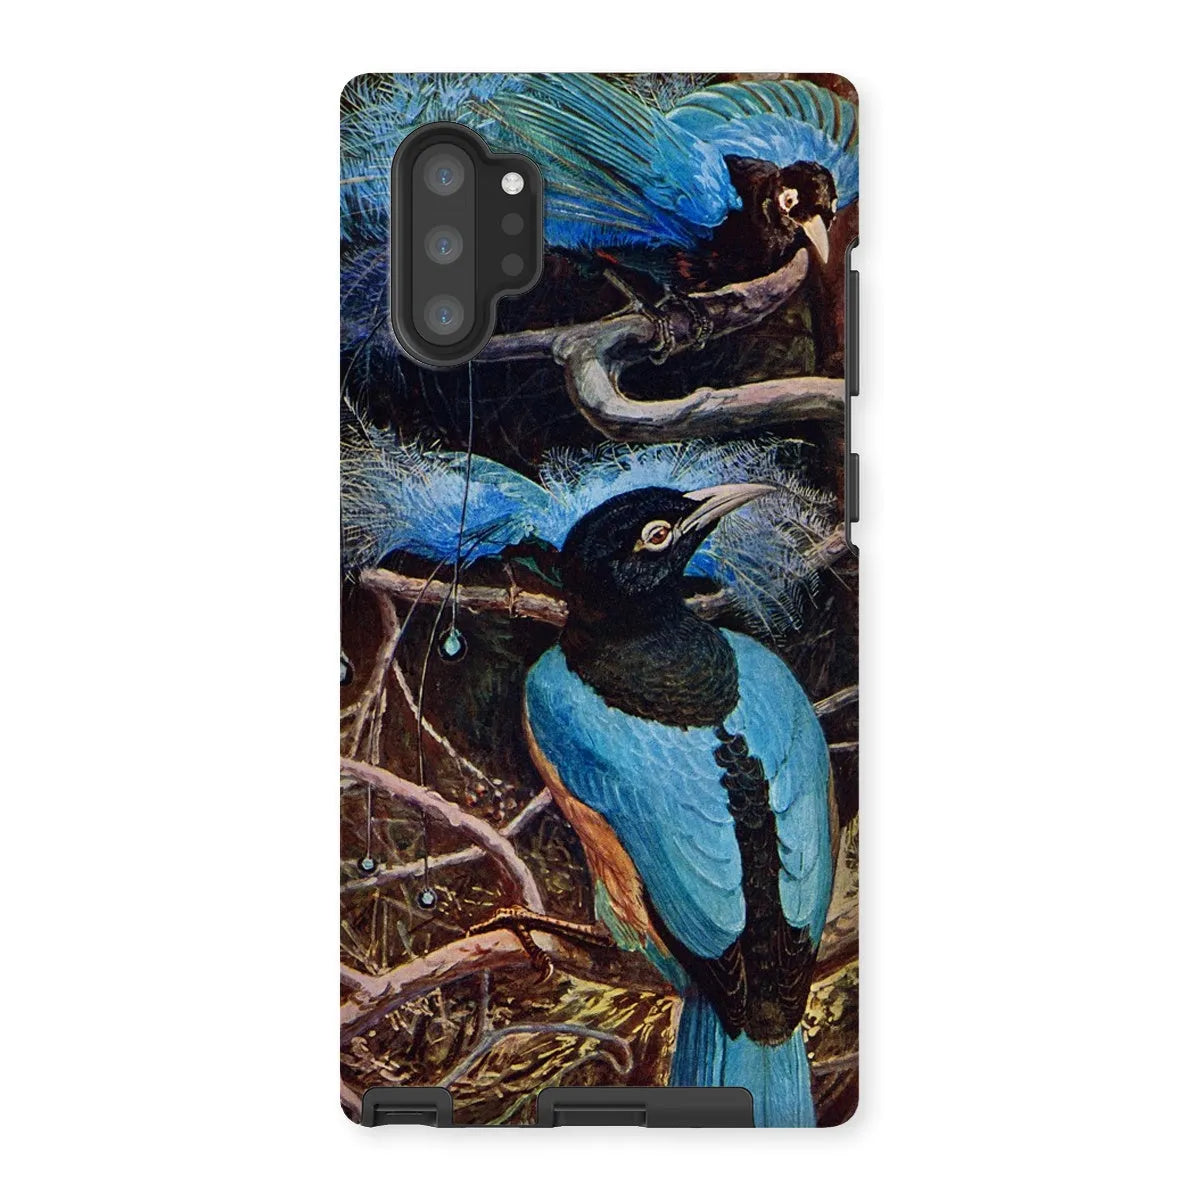 Blue Bird Of Paradise Aesthetic Phone Case - Henry Johnston - Samsung Galaxy Note 10p / Matte - Mobile Phone Cases